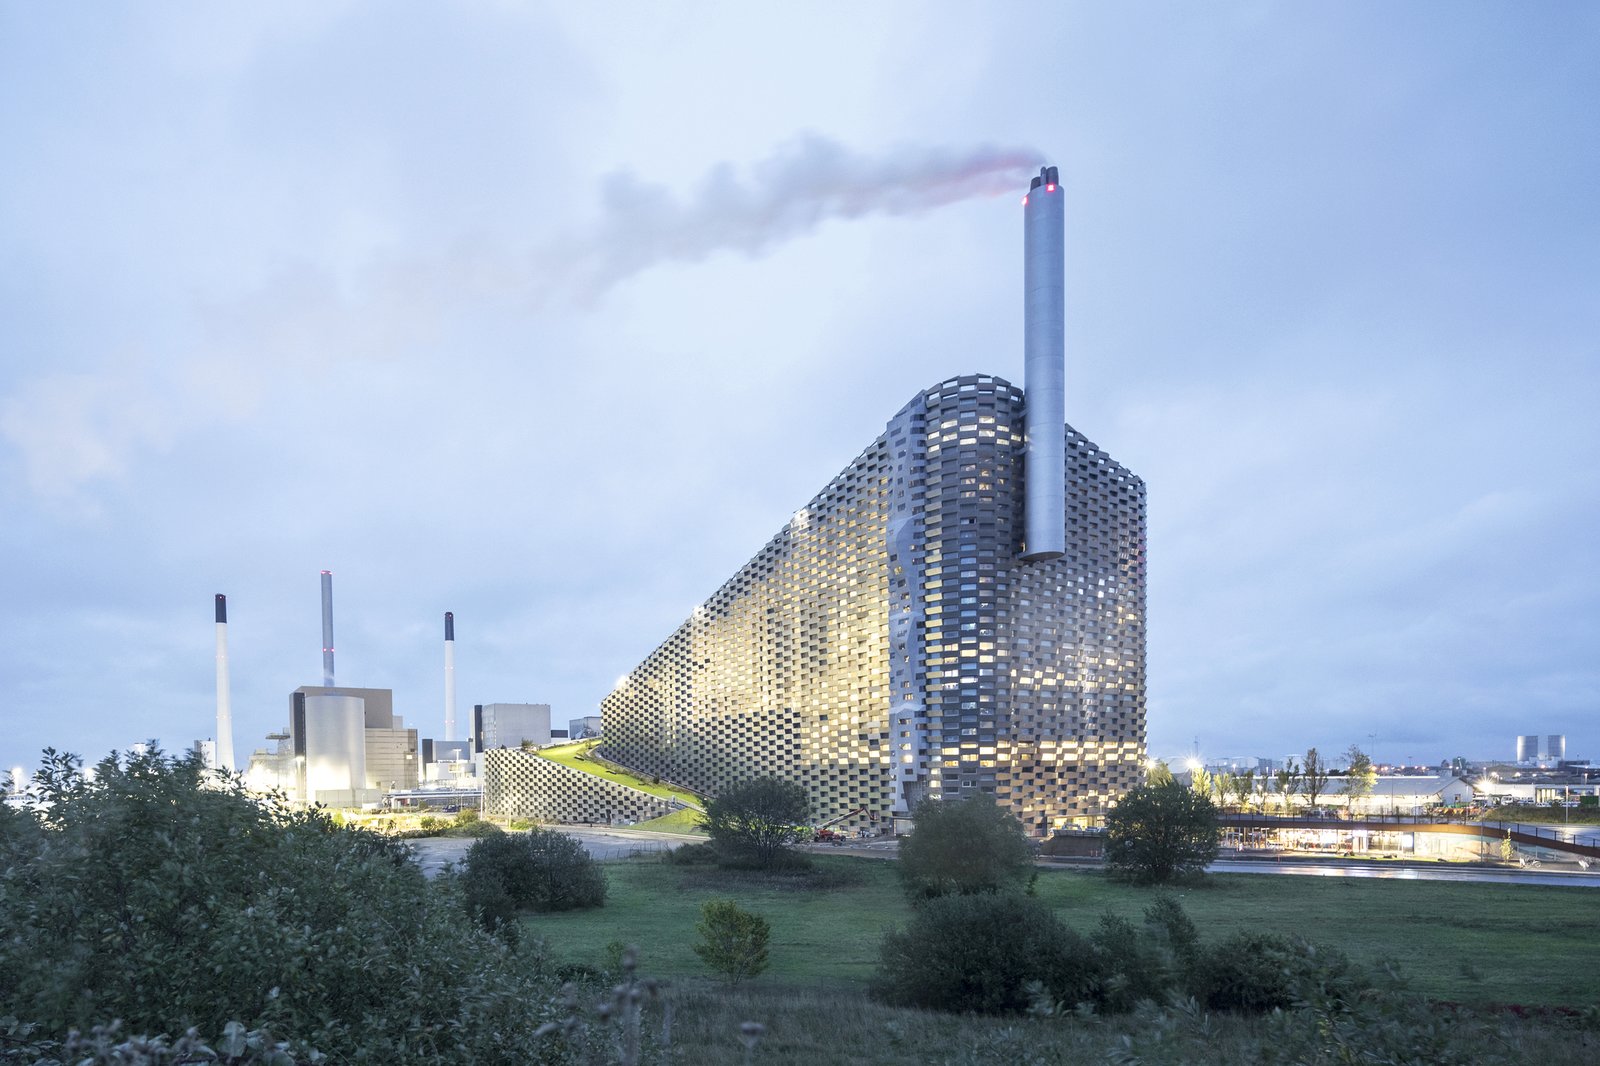 copenhill-uses-copenhagens-trash-to-produce-electricity-and-radiant-heating.jpg